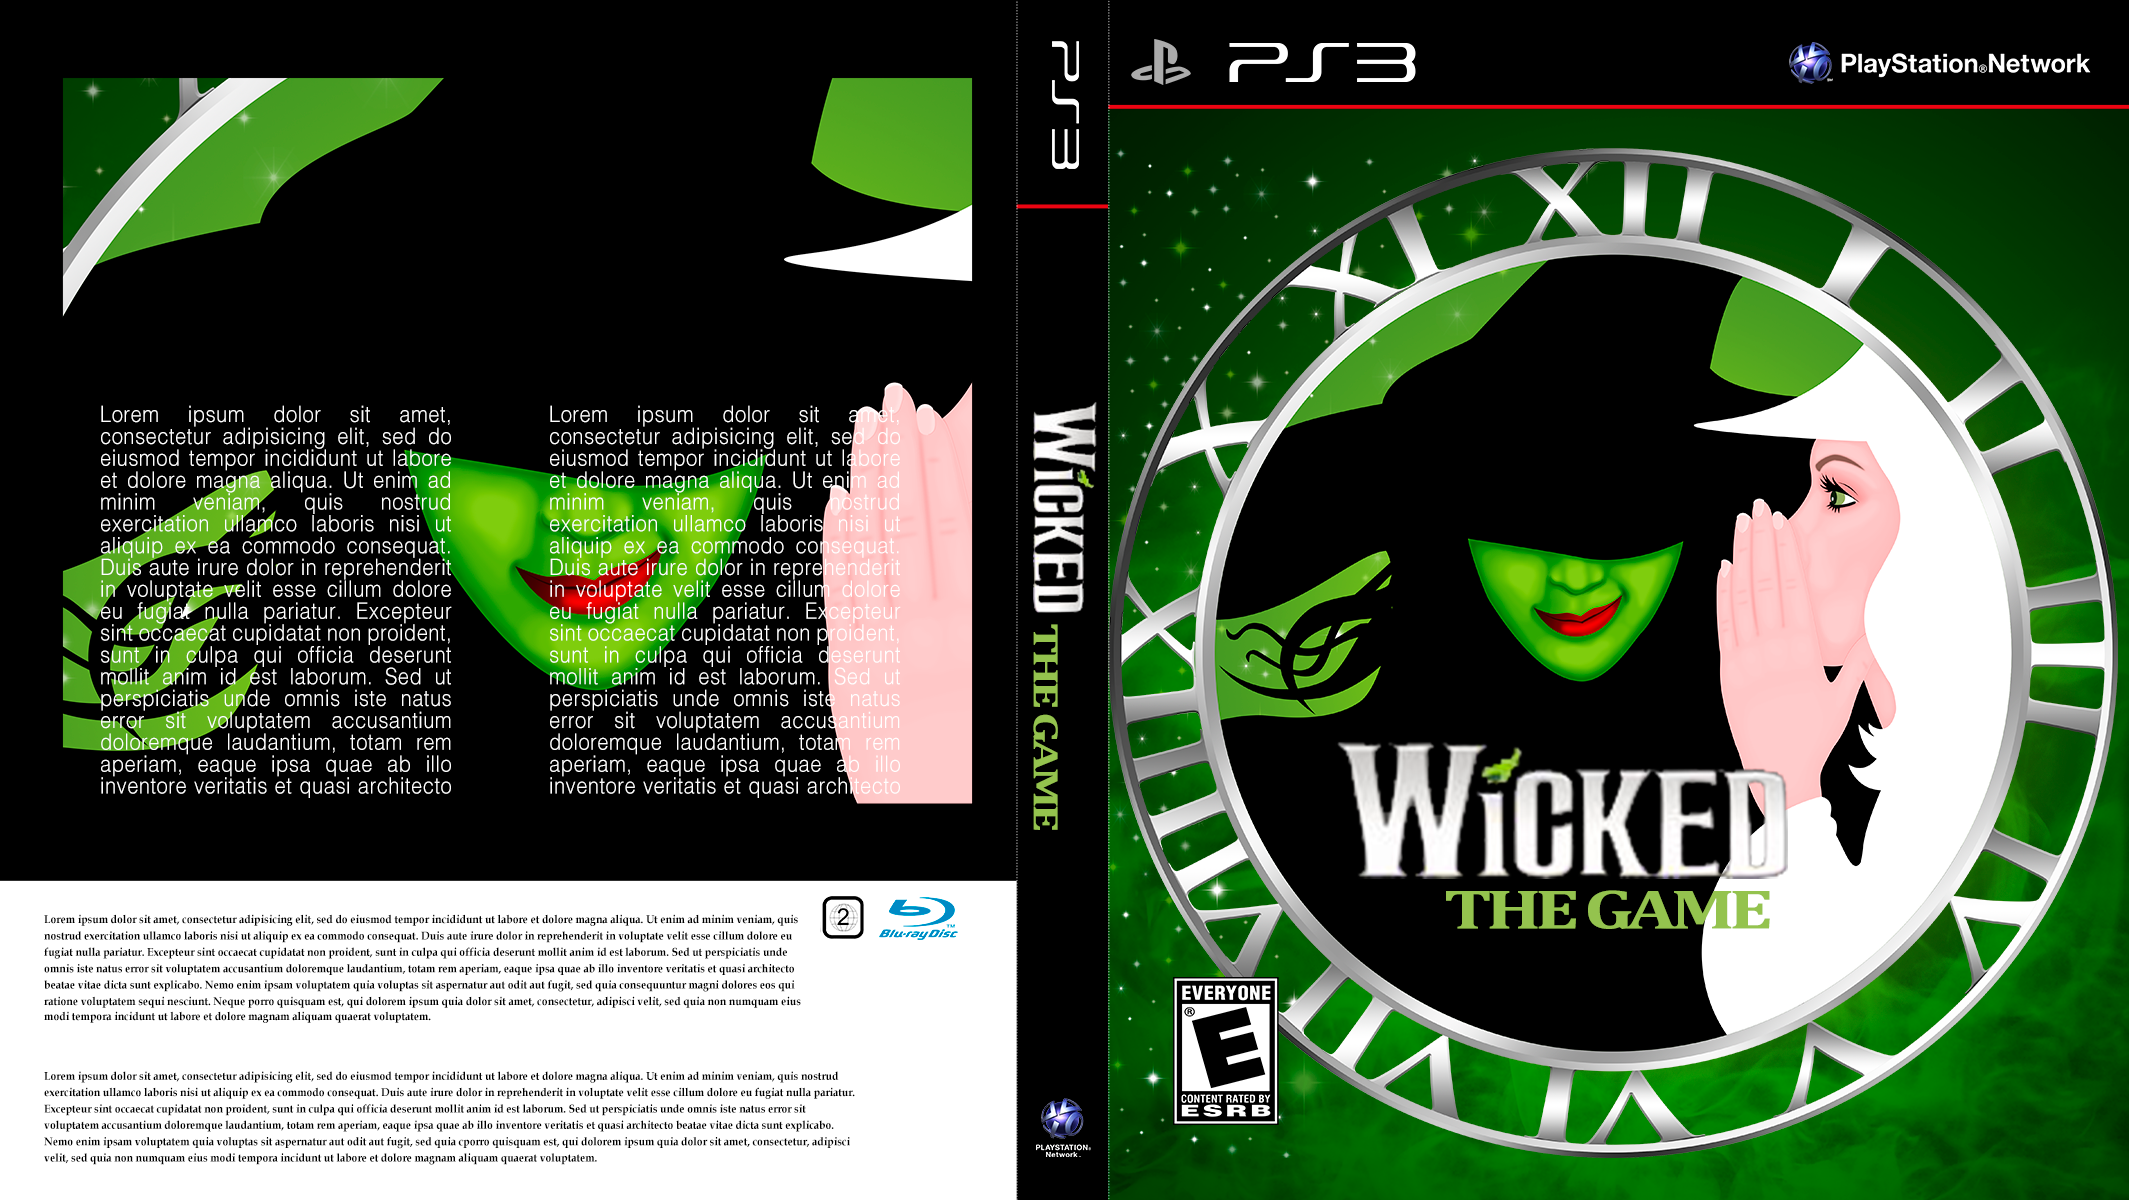 Wicked PSP